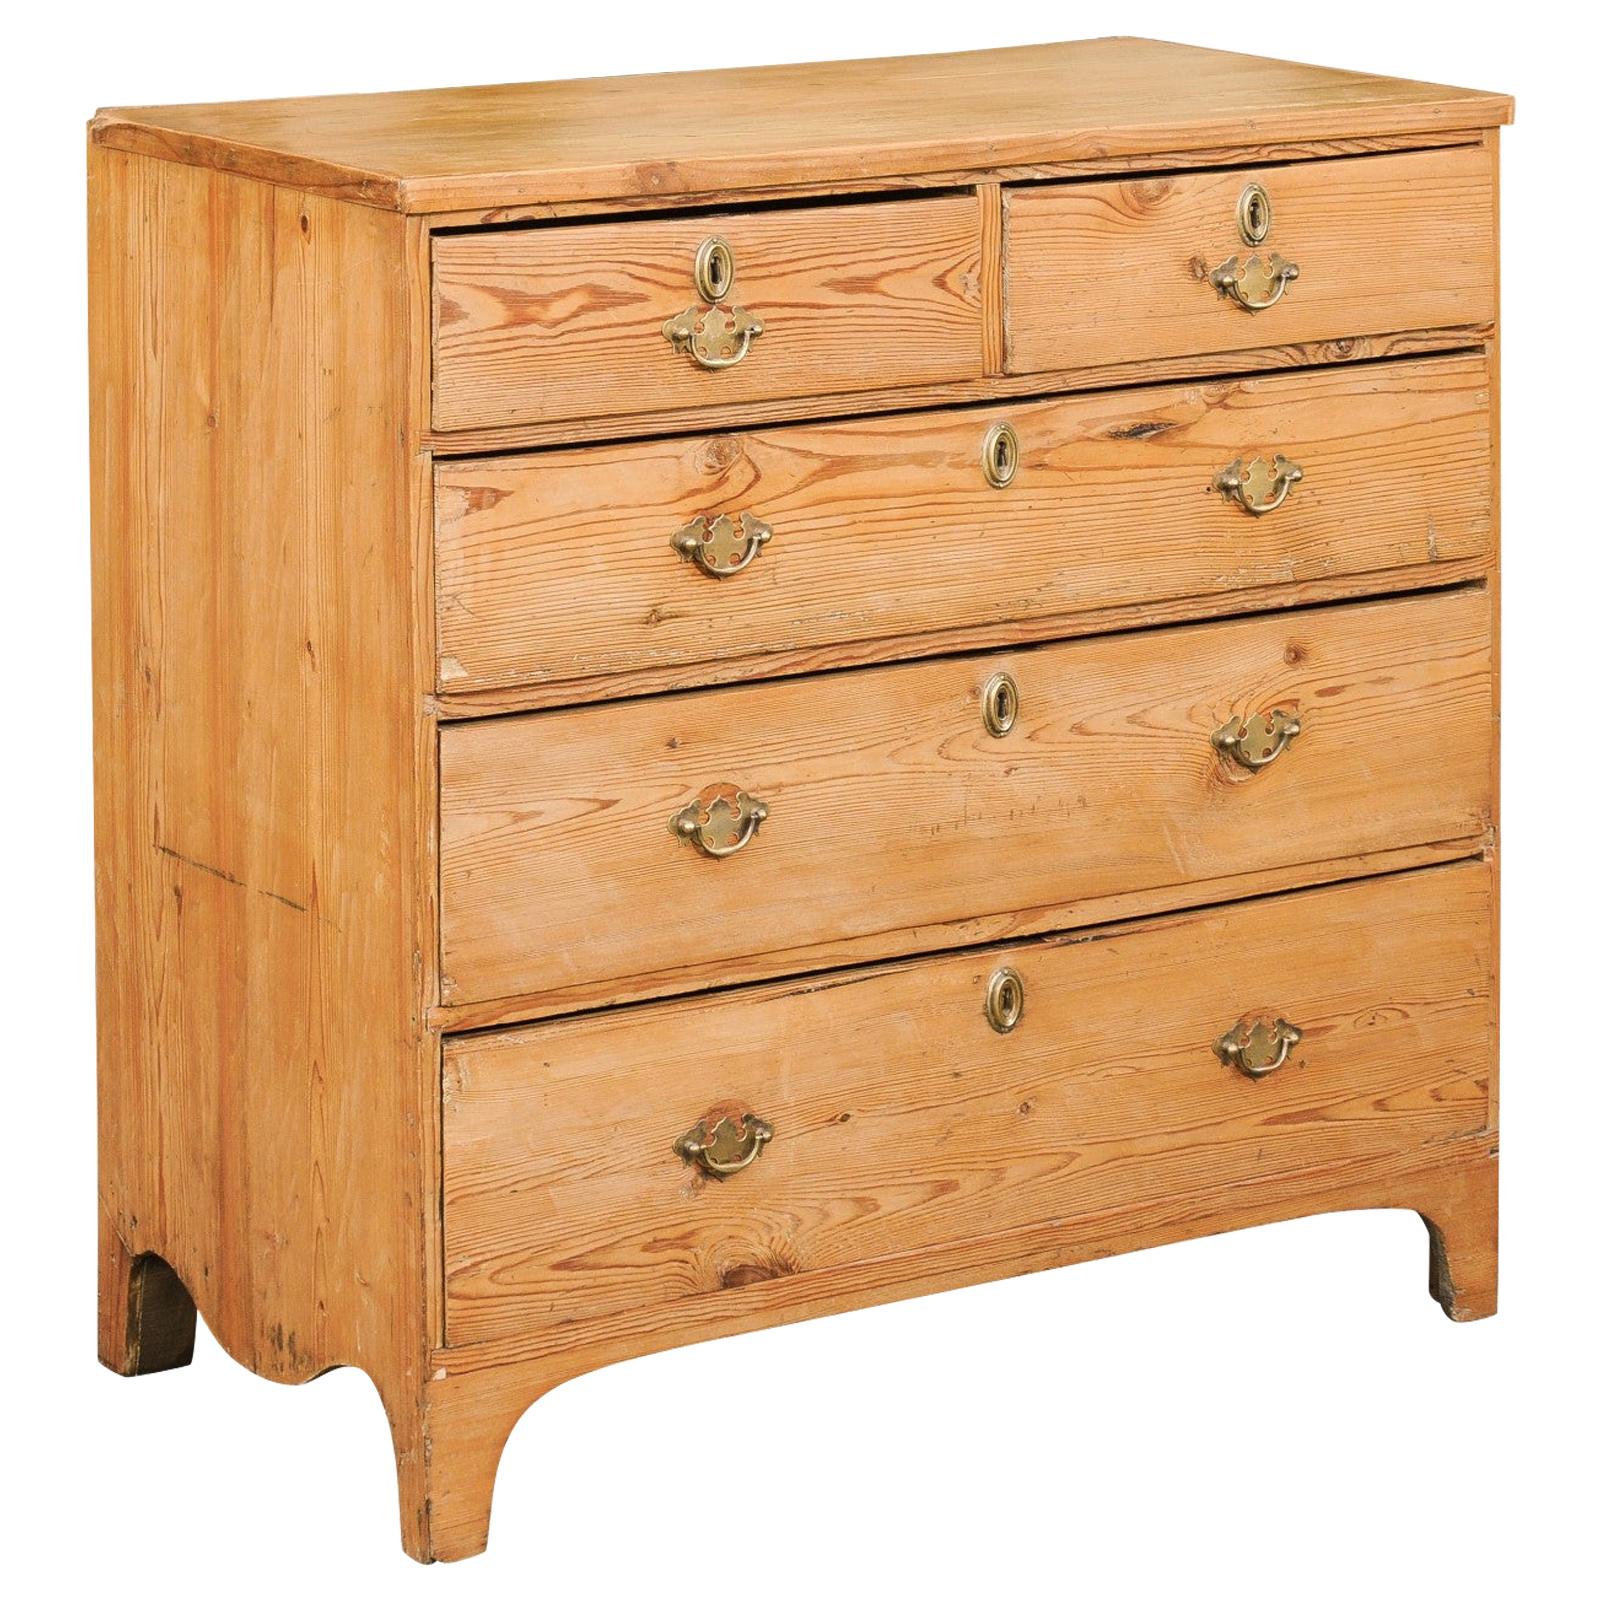 English Georgian Period 1820s Pine Five-Drawer Chest with Arched Skirt